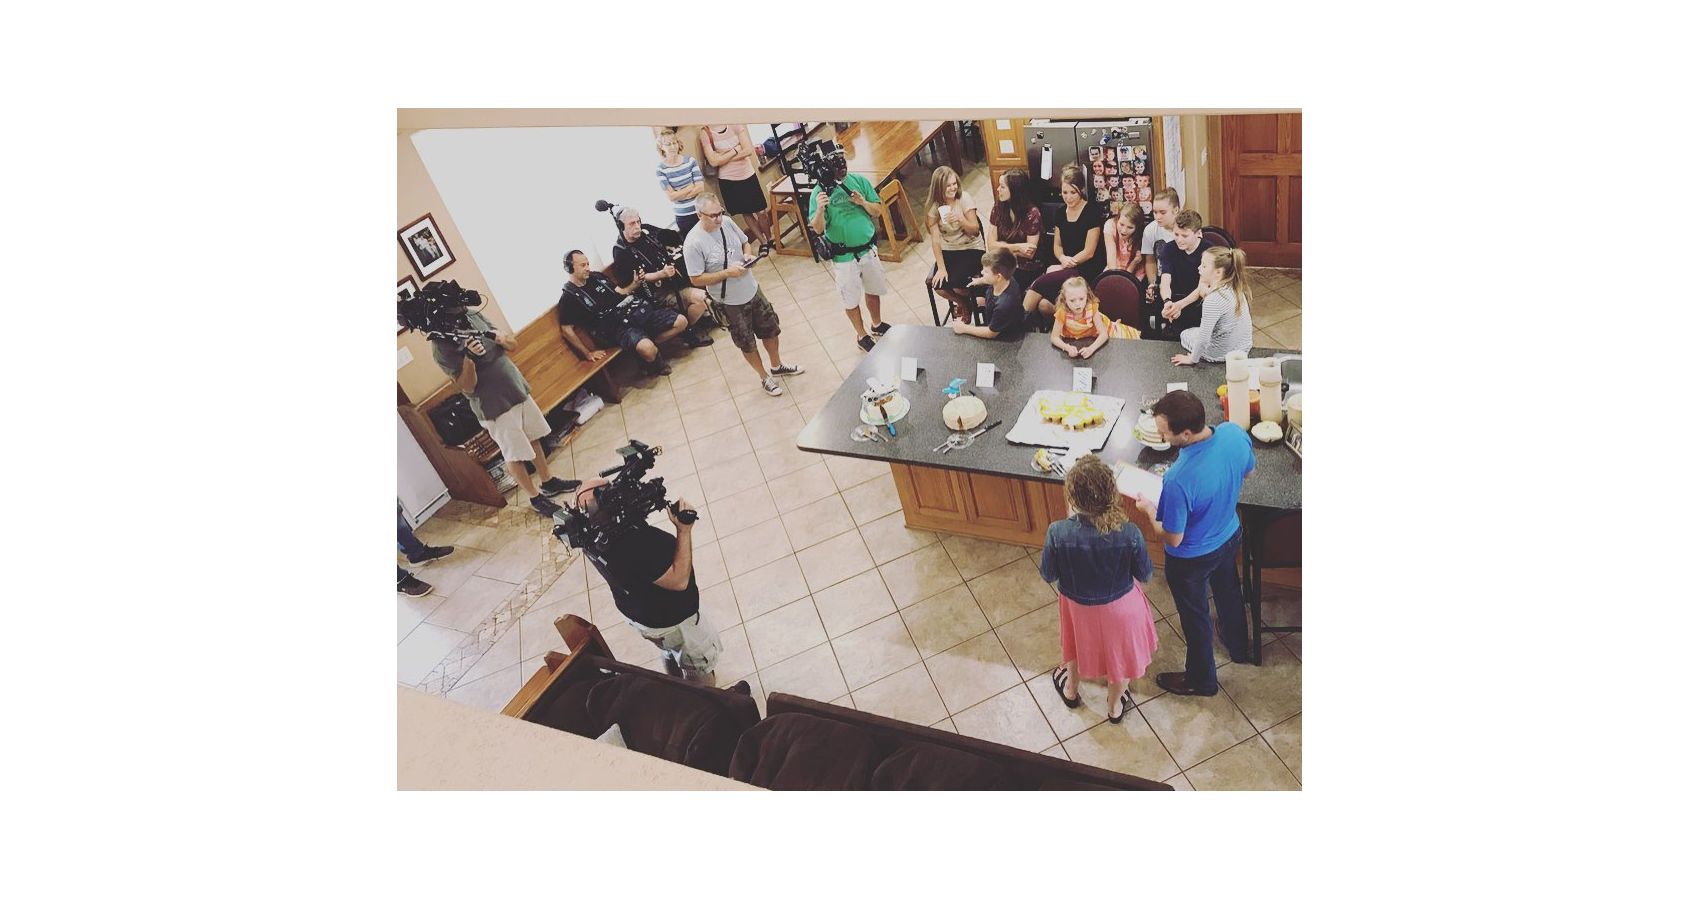 Film crew in Duggar home filming 'Counting On'